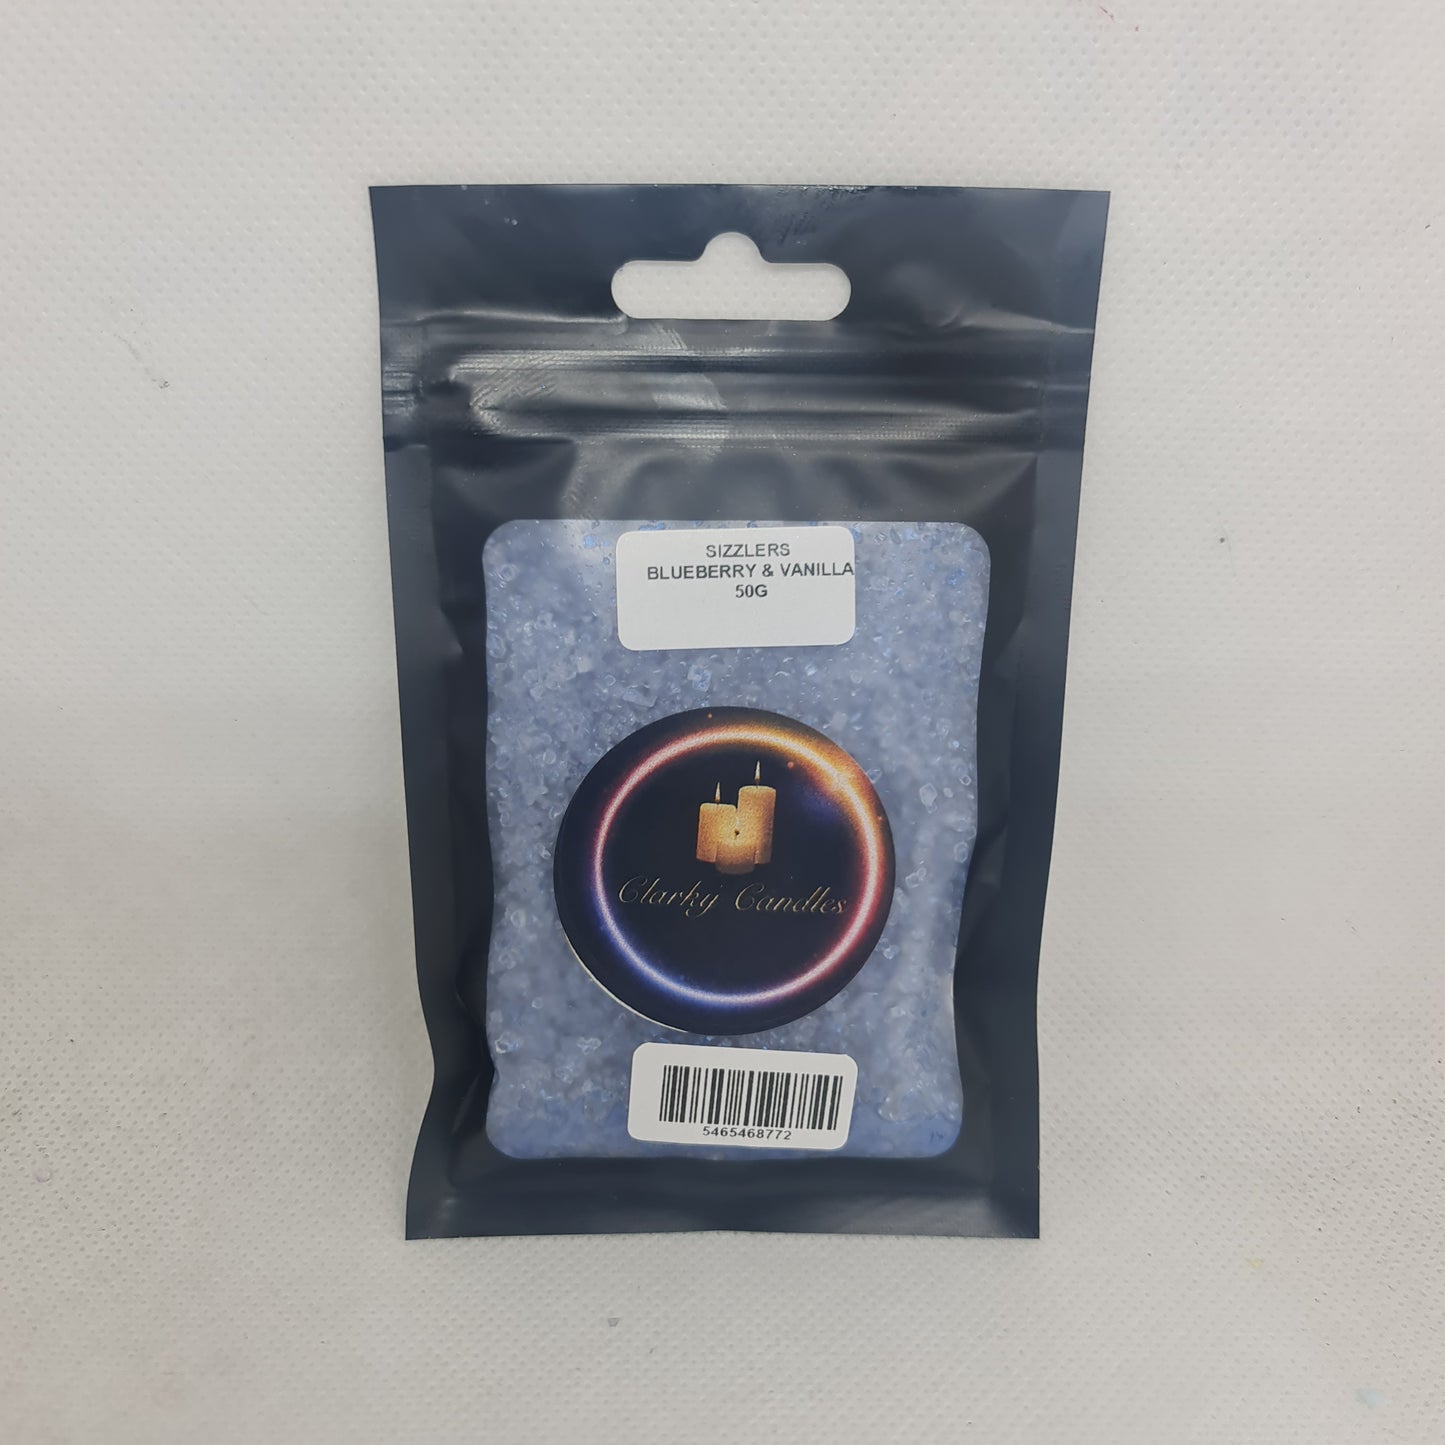 Blueberry & Vanilla - 50g - Scented Sizzlers